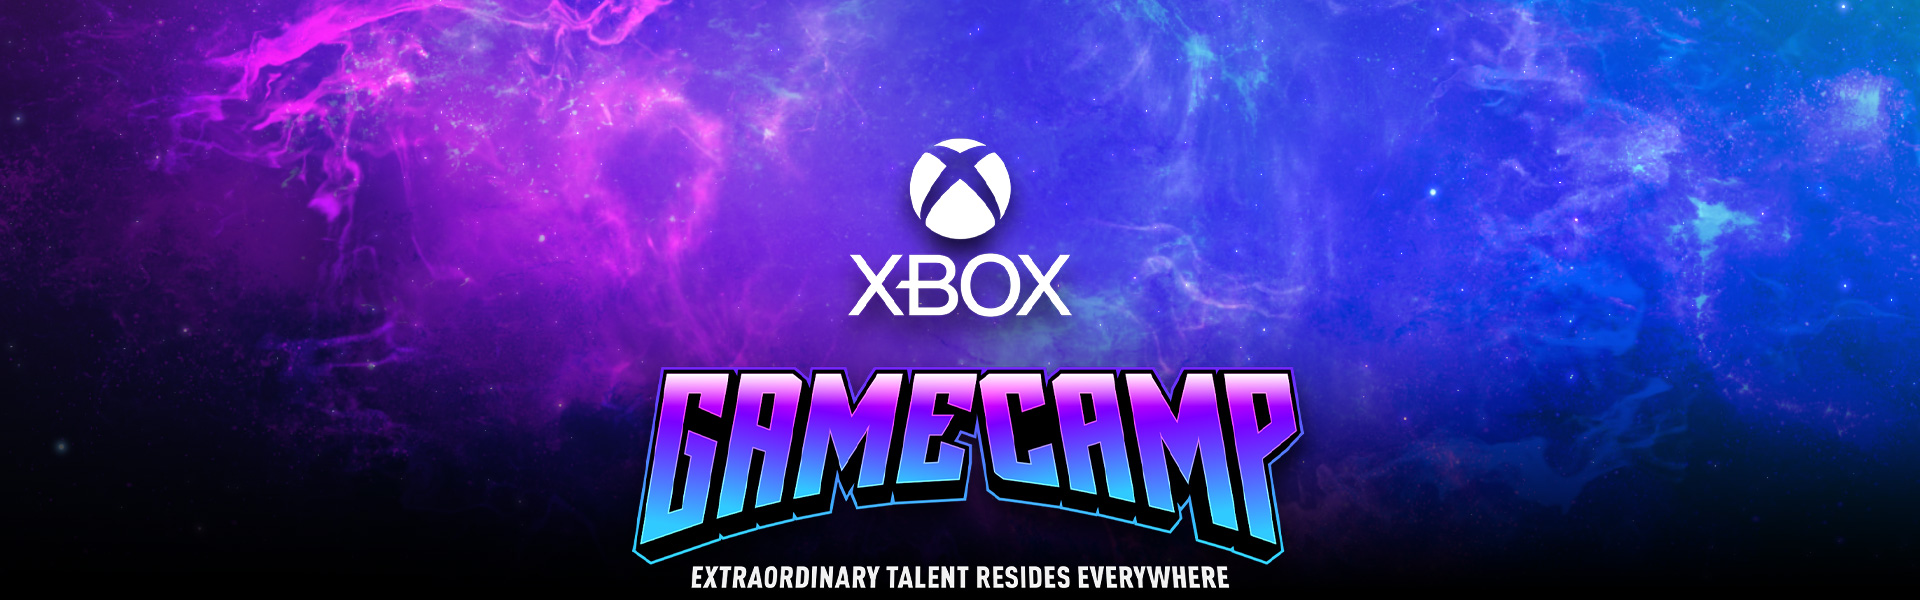 Xbox Game Camp logo, Extraordinary talent resides everywhere